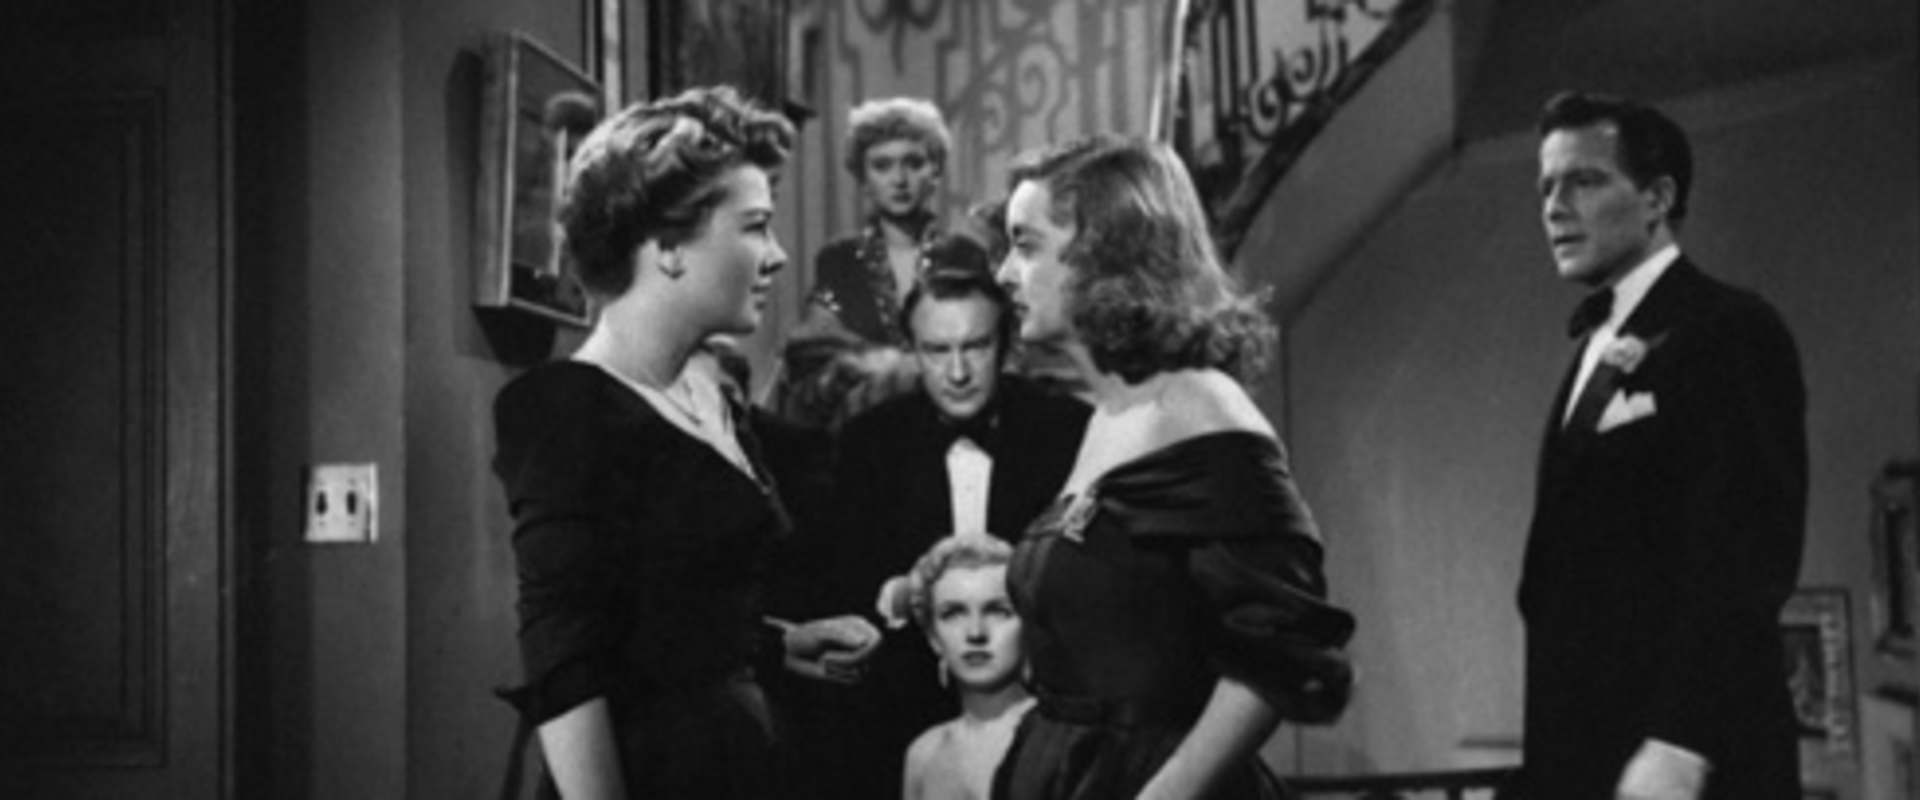 All About Eve background 2